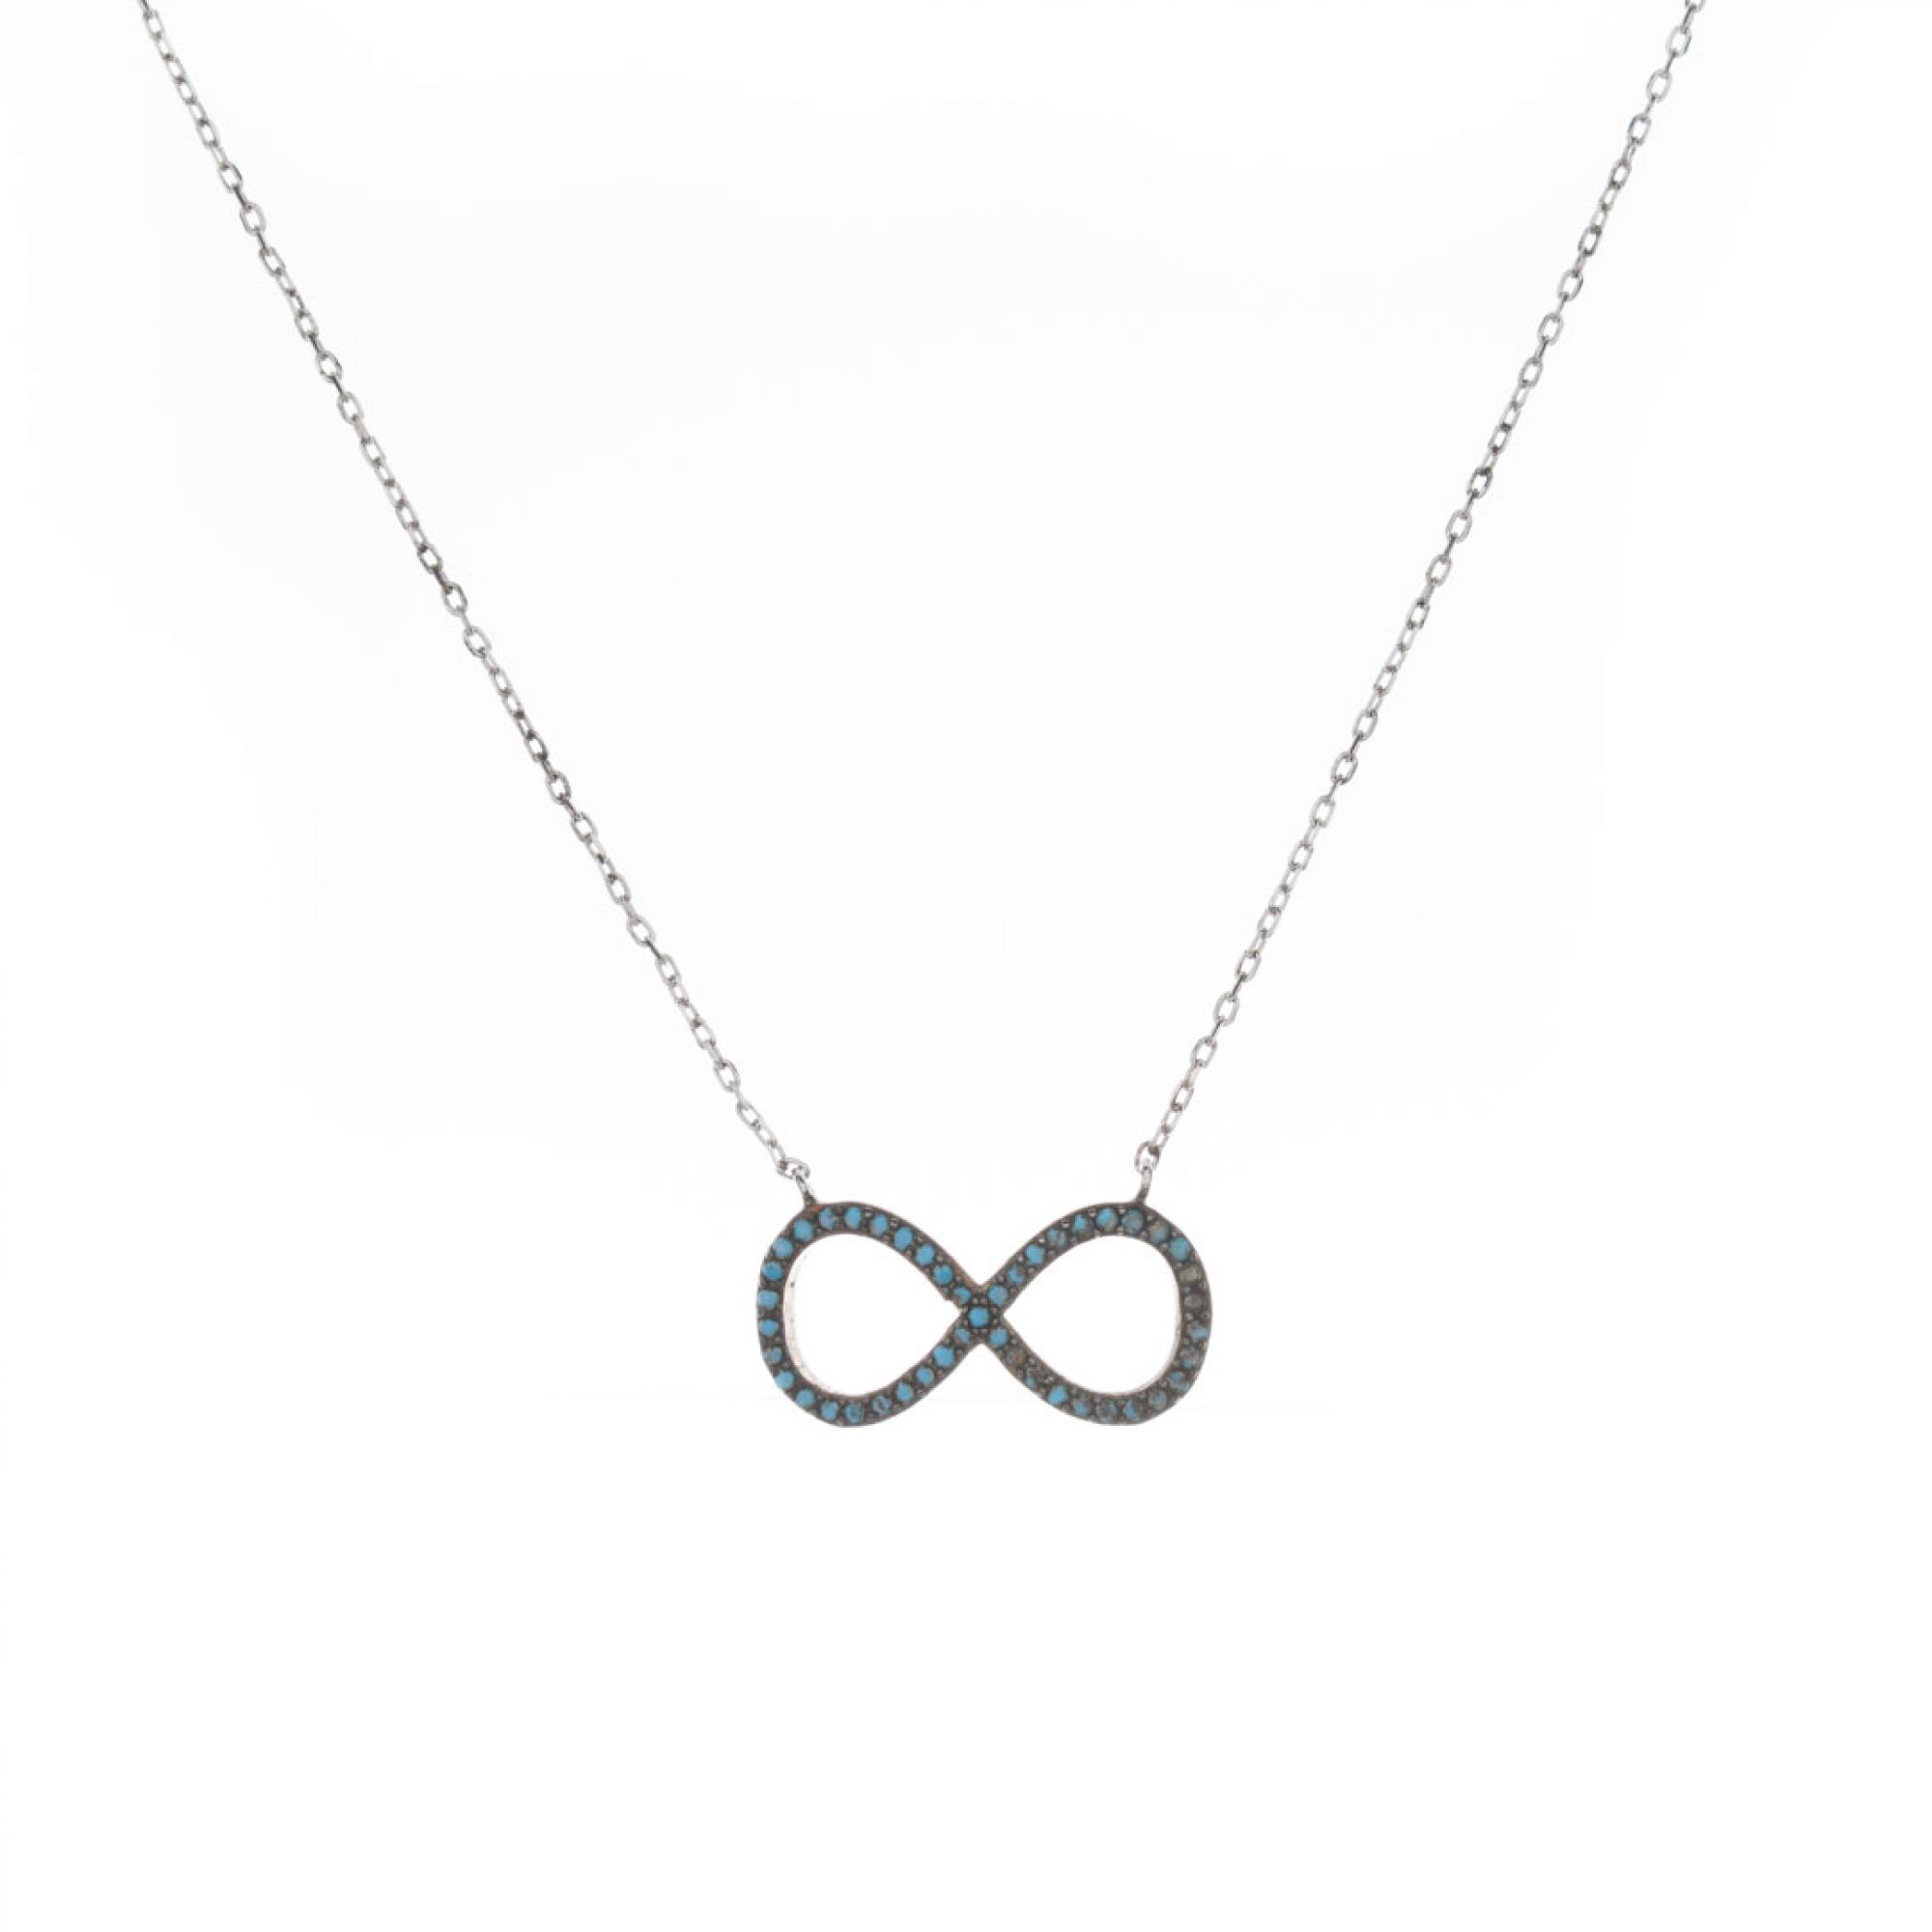 Infinity necklace with turquoise stones